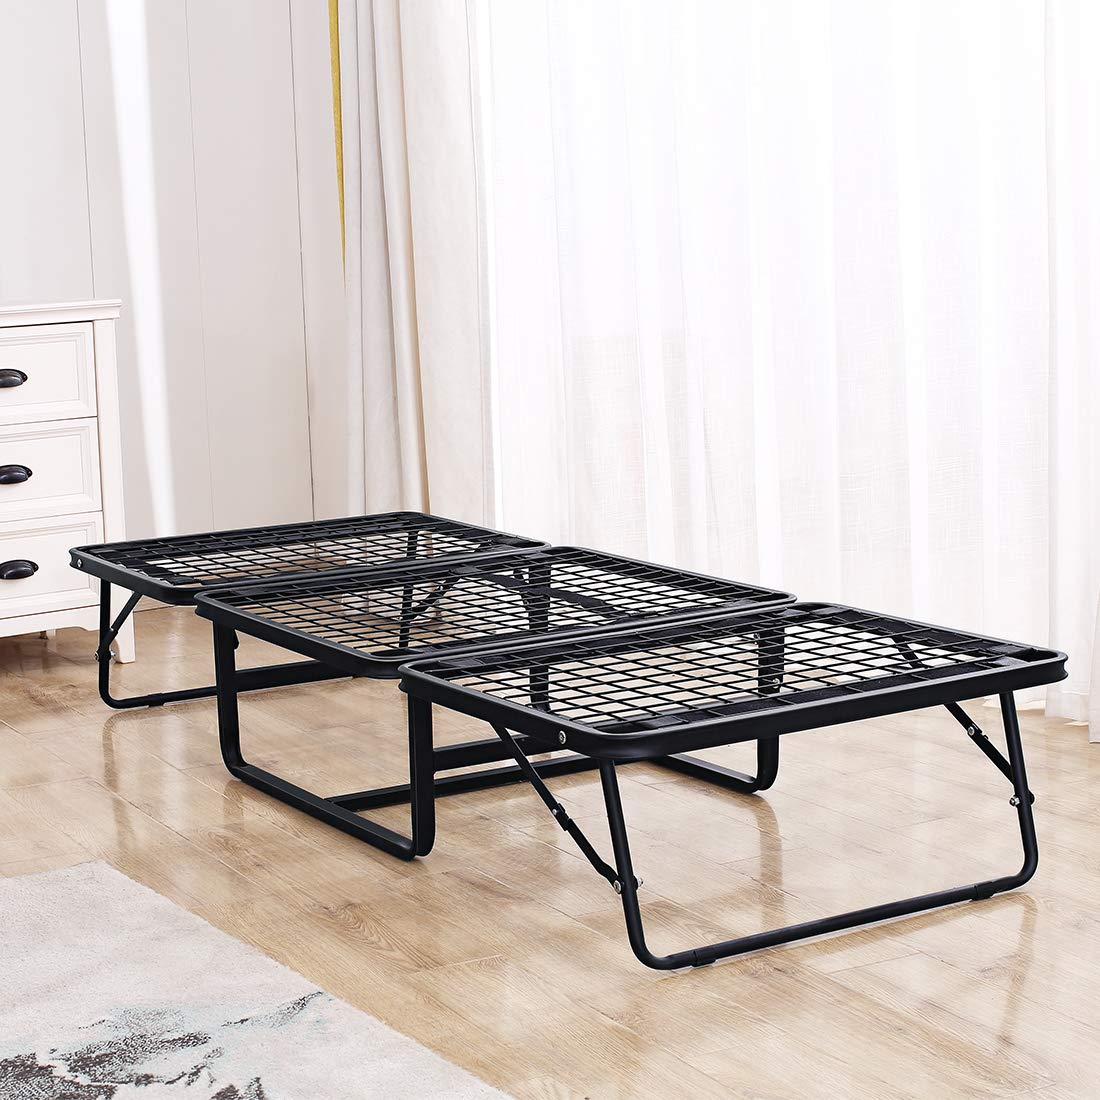 Tatago Ottoman Folding Bed with Steel Mesh Wire Lattice Base, 78" x 30" - image 2 of 7